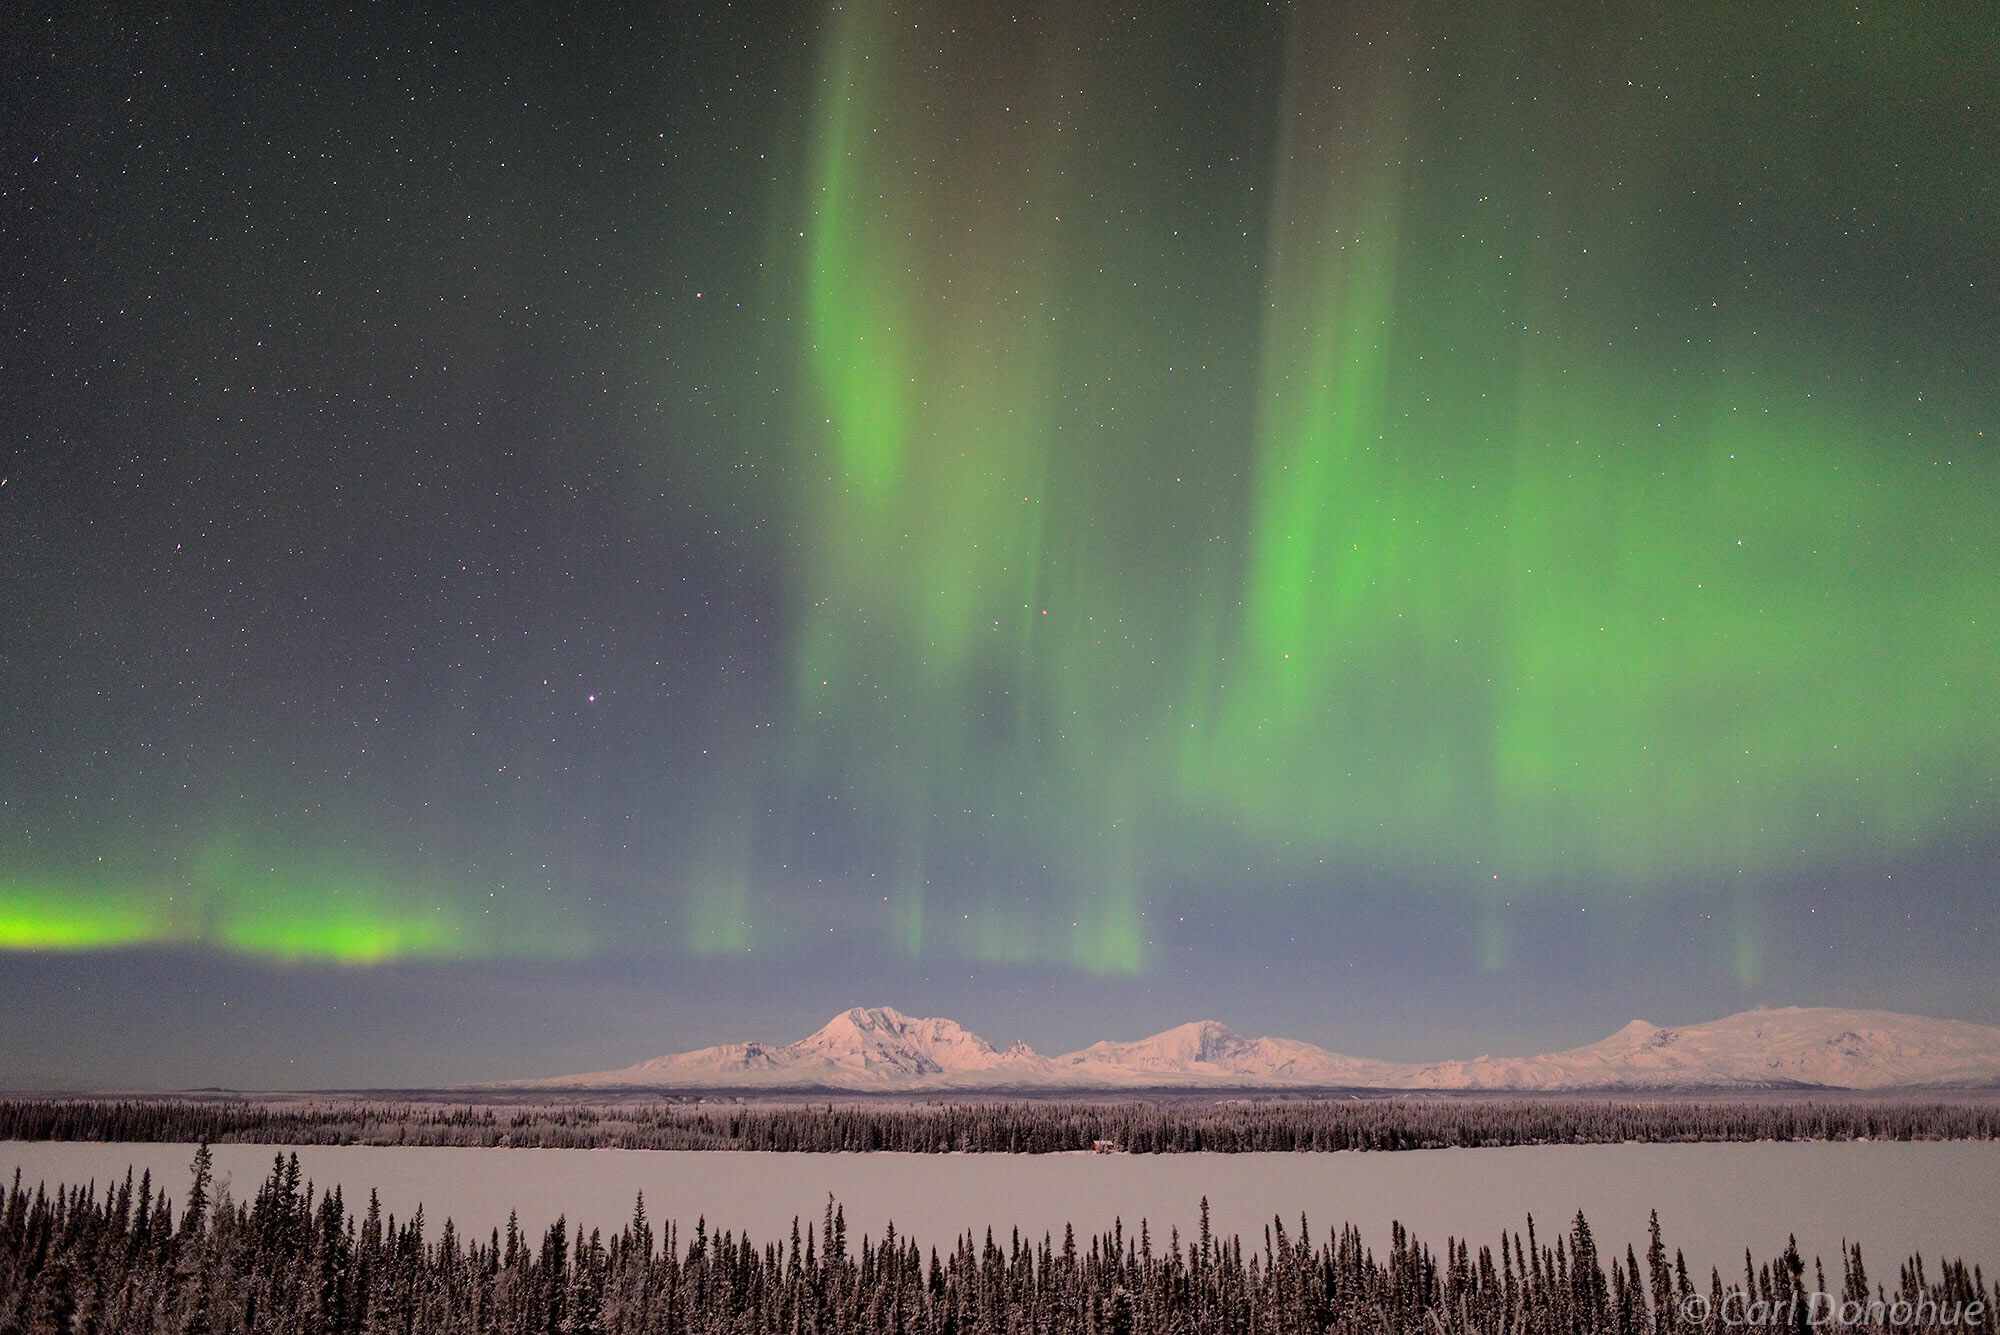 The northern lights fill the sky over the Wrangell Mountains and Wrangell - St. Elias National Park and Preserve, Alaska.